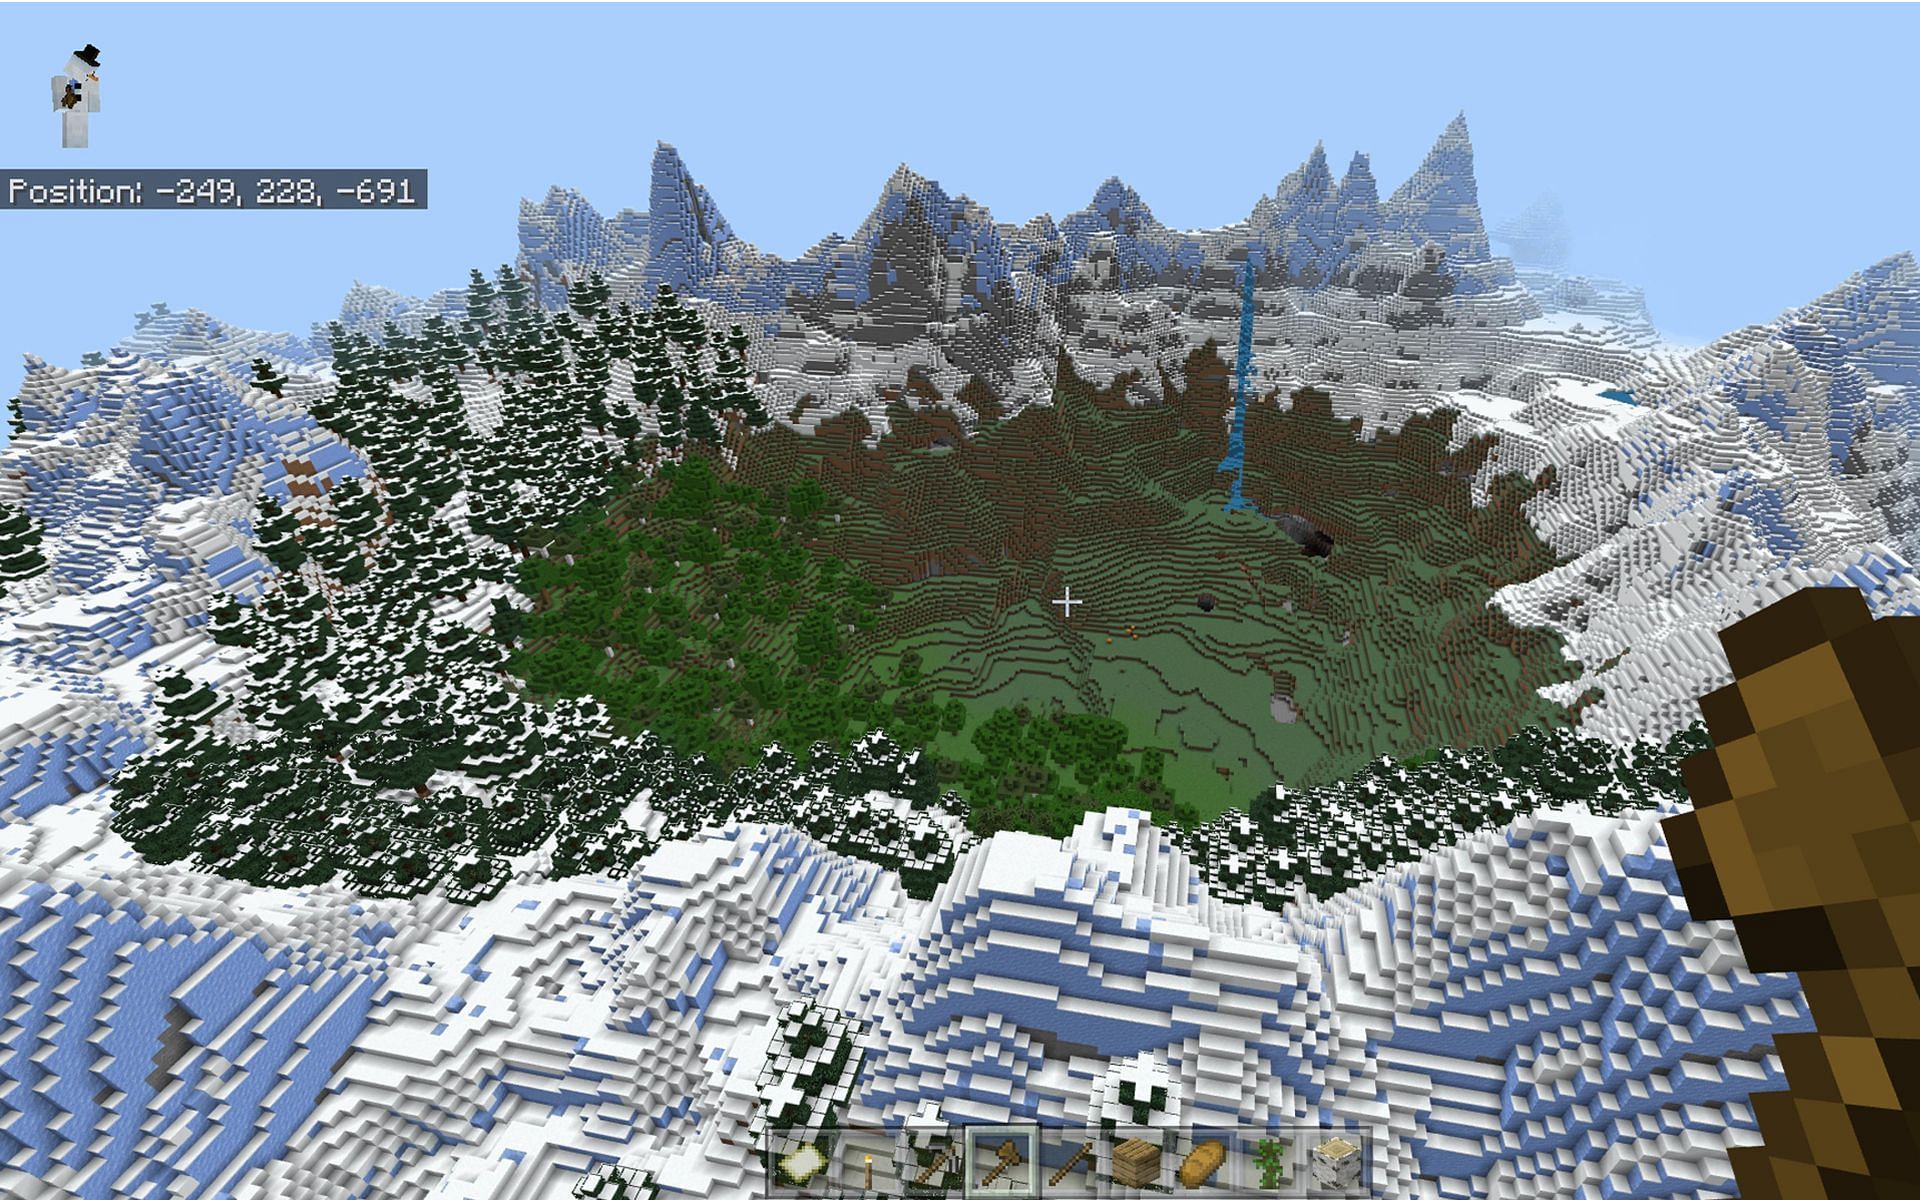 This seed&#039;s terrain lends itself to all sorts of fun builds. (Image via Minecraft)